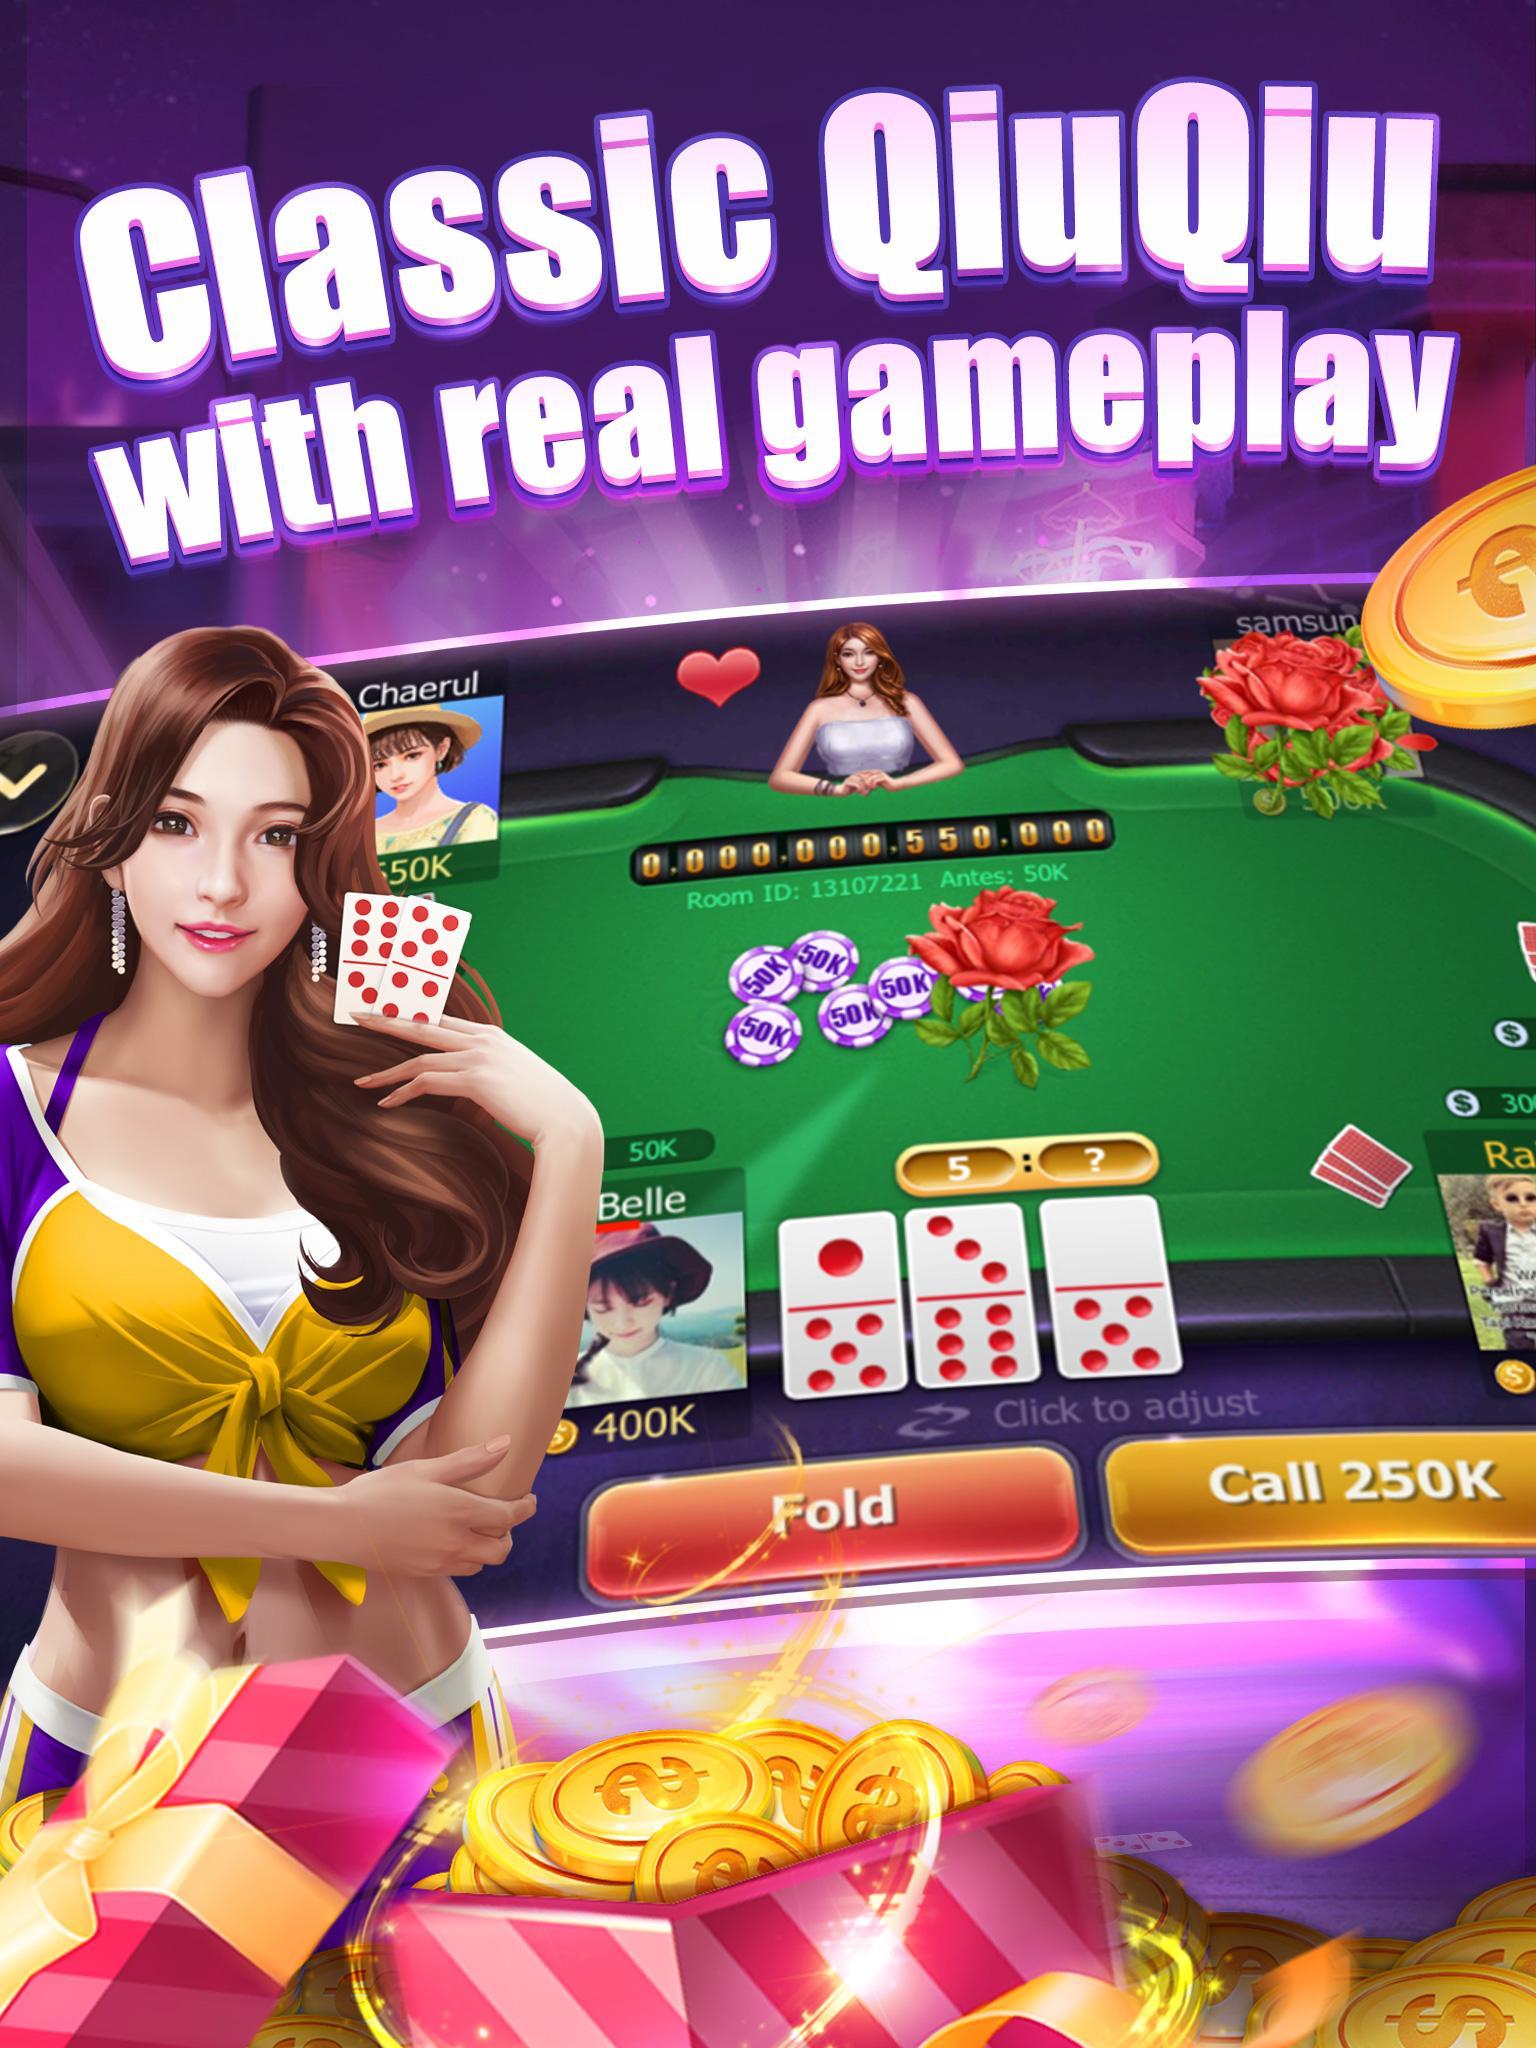 Read more about the article Download Game Domino Qiu Qiu Online Untuk Android, Gaple Capsa Susun: QiuQiu(99)/Texas Remi Online<div class="yasr-vv-stars-title-container"><div class='yasr-stars-title yasr-rater-stars'
                          id='yasr-visitor-votes-readonly-rater-7db360d543668'
                          data-rating='0'
                          data-rater-starsize='16'
                          data-rater-postid='2298'
                          data-rater-readonly='true'
                          data-readonly-attribute='true'
                      ></div><span class='yasr-stars-title-average'>0 (0)</span></div>